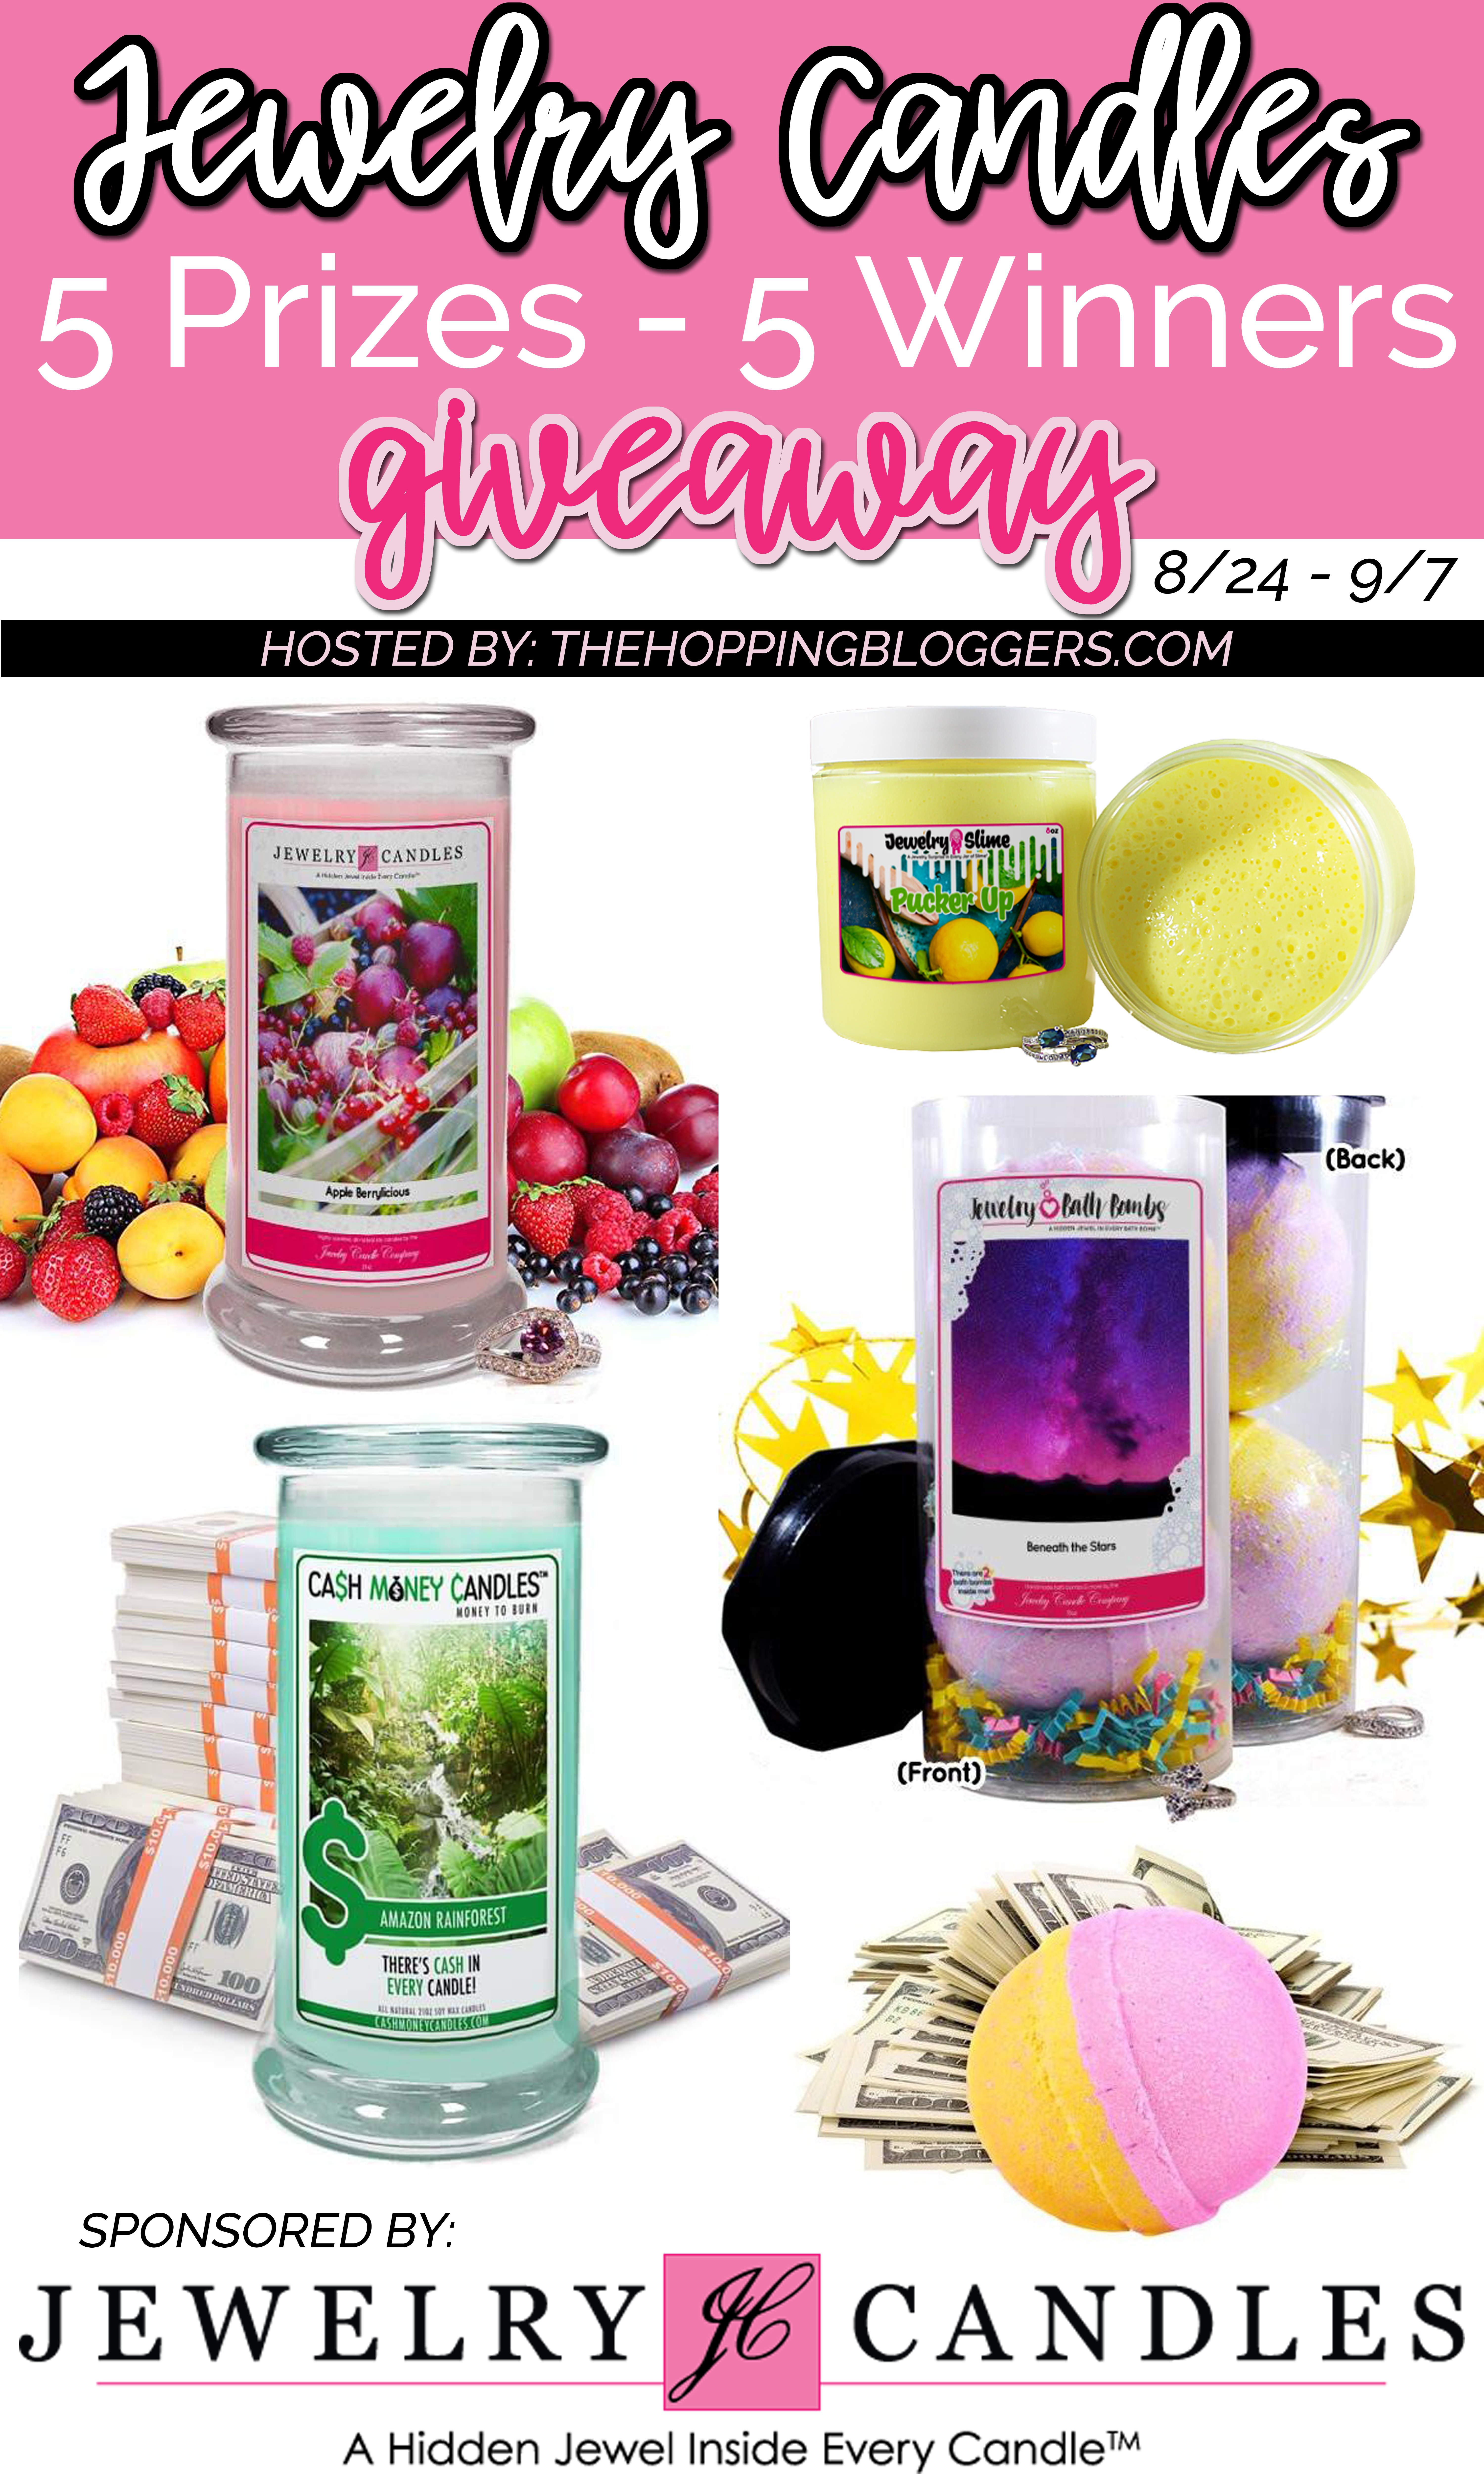 Enter to win a Jewerly Candle (5 Winners) #JewelryCandles #ad #THBgiveaway